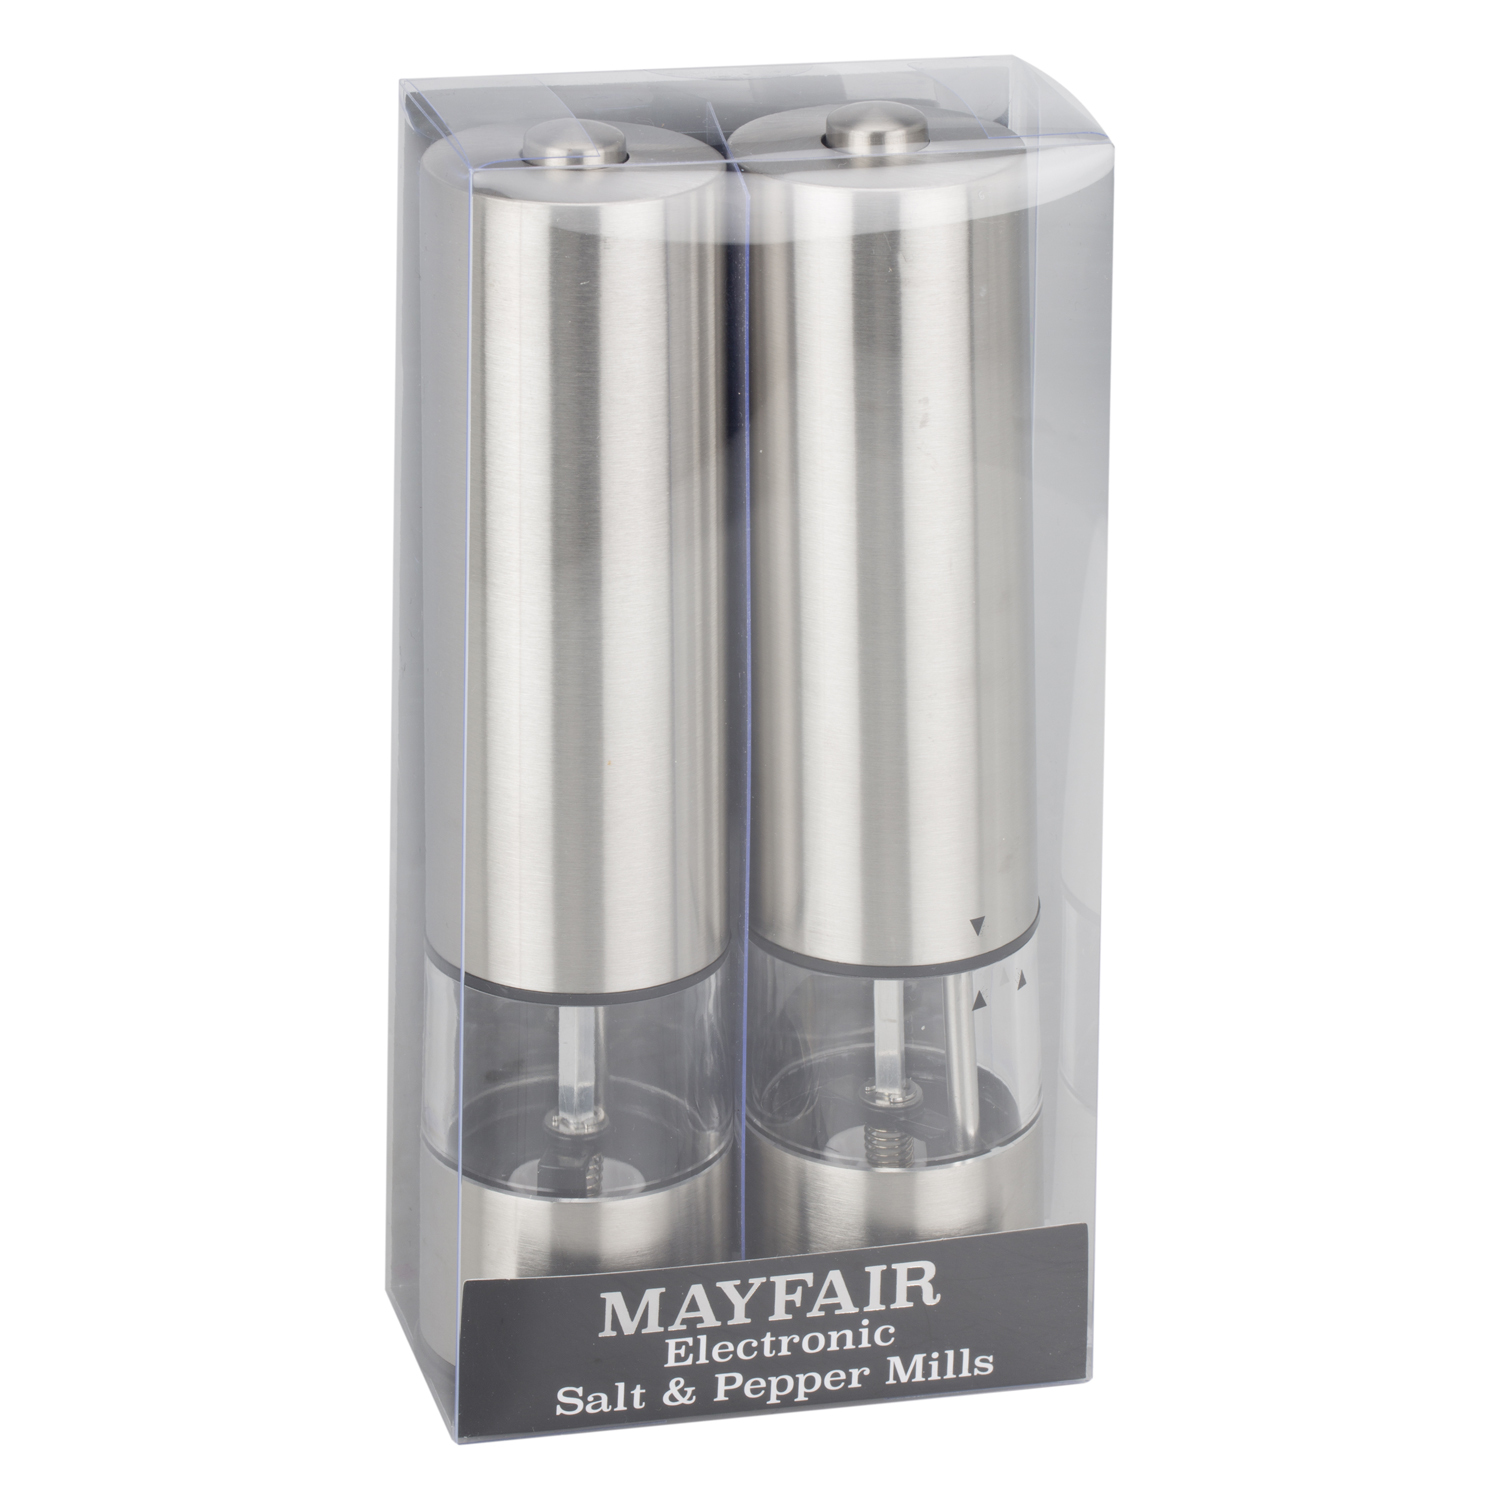 Mayfair Electric Stainless Steel Salt and Pepper Mill Set Image 2